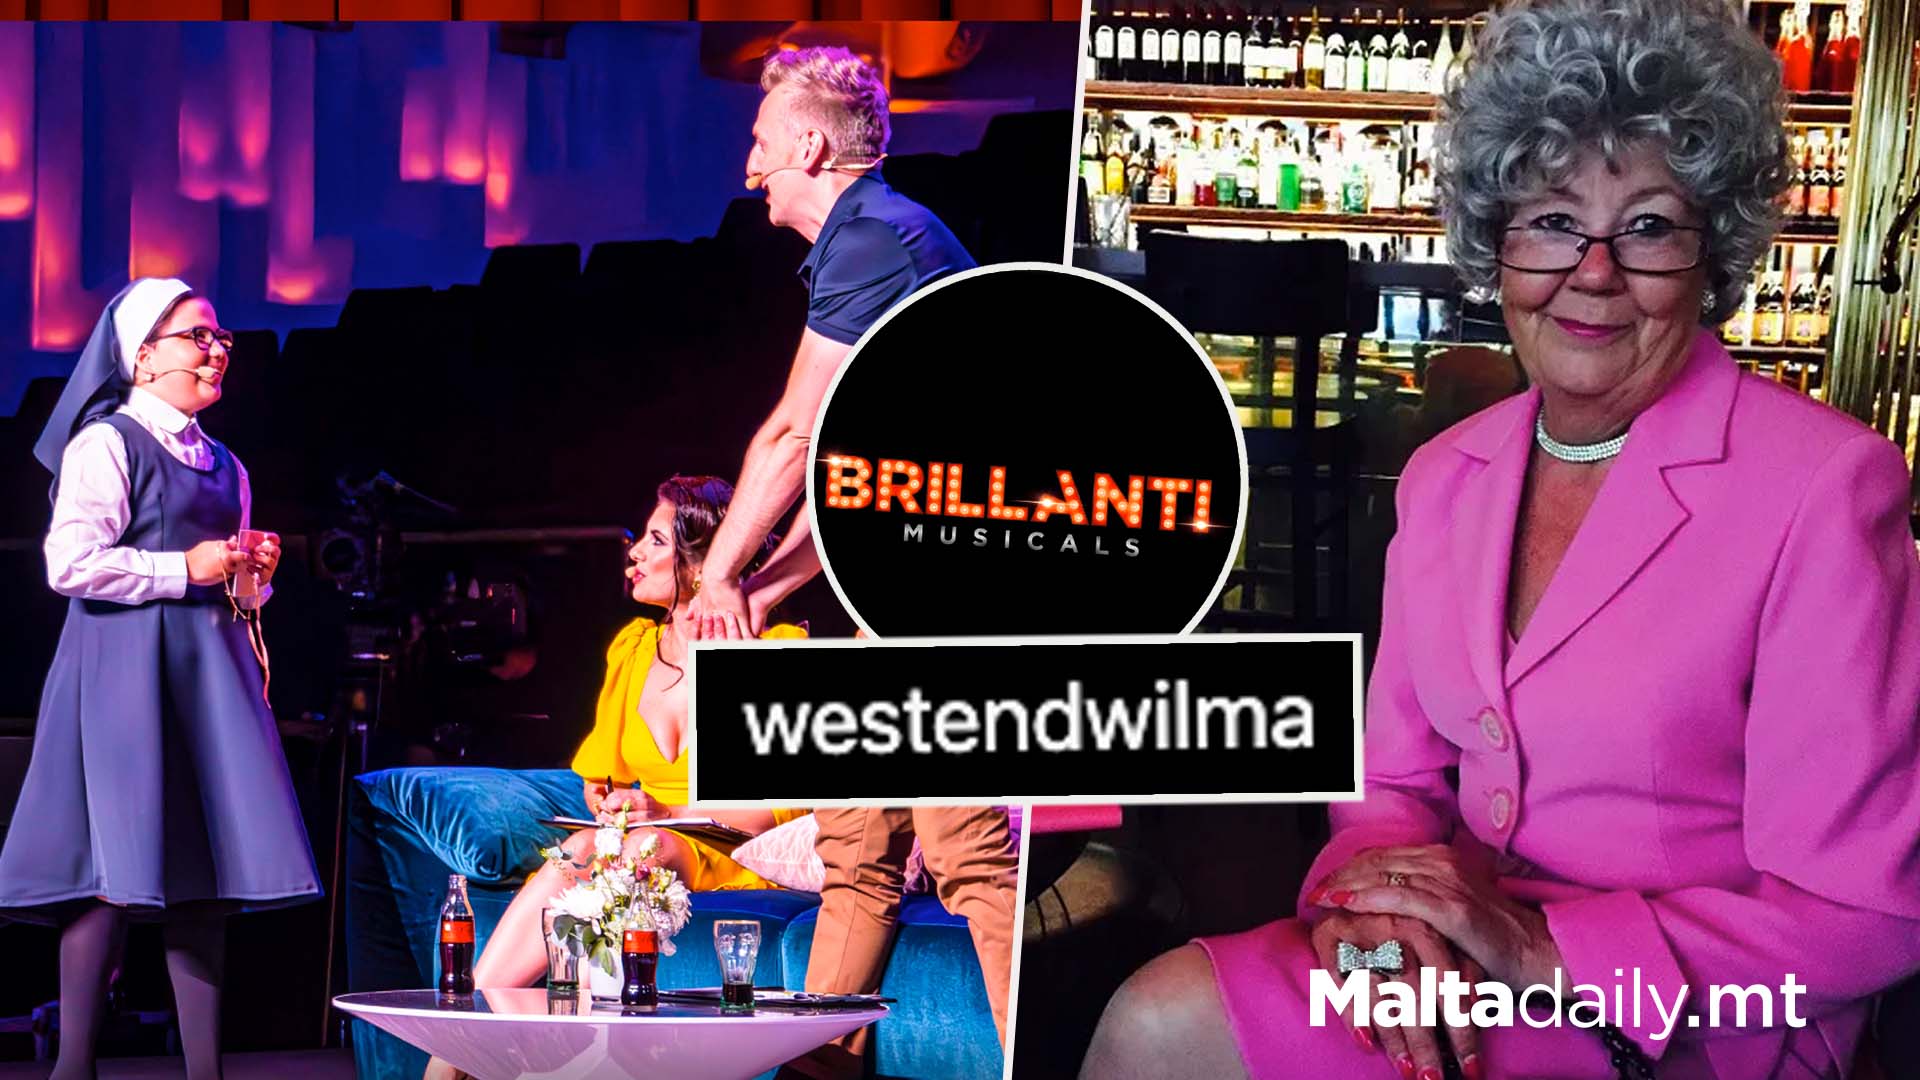 Brillanti A Hit With West End Giant Blogger & UK Audiences